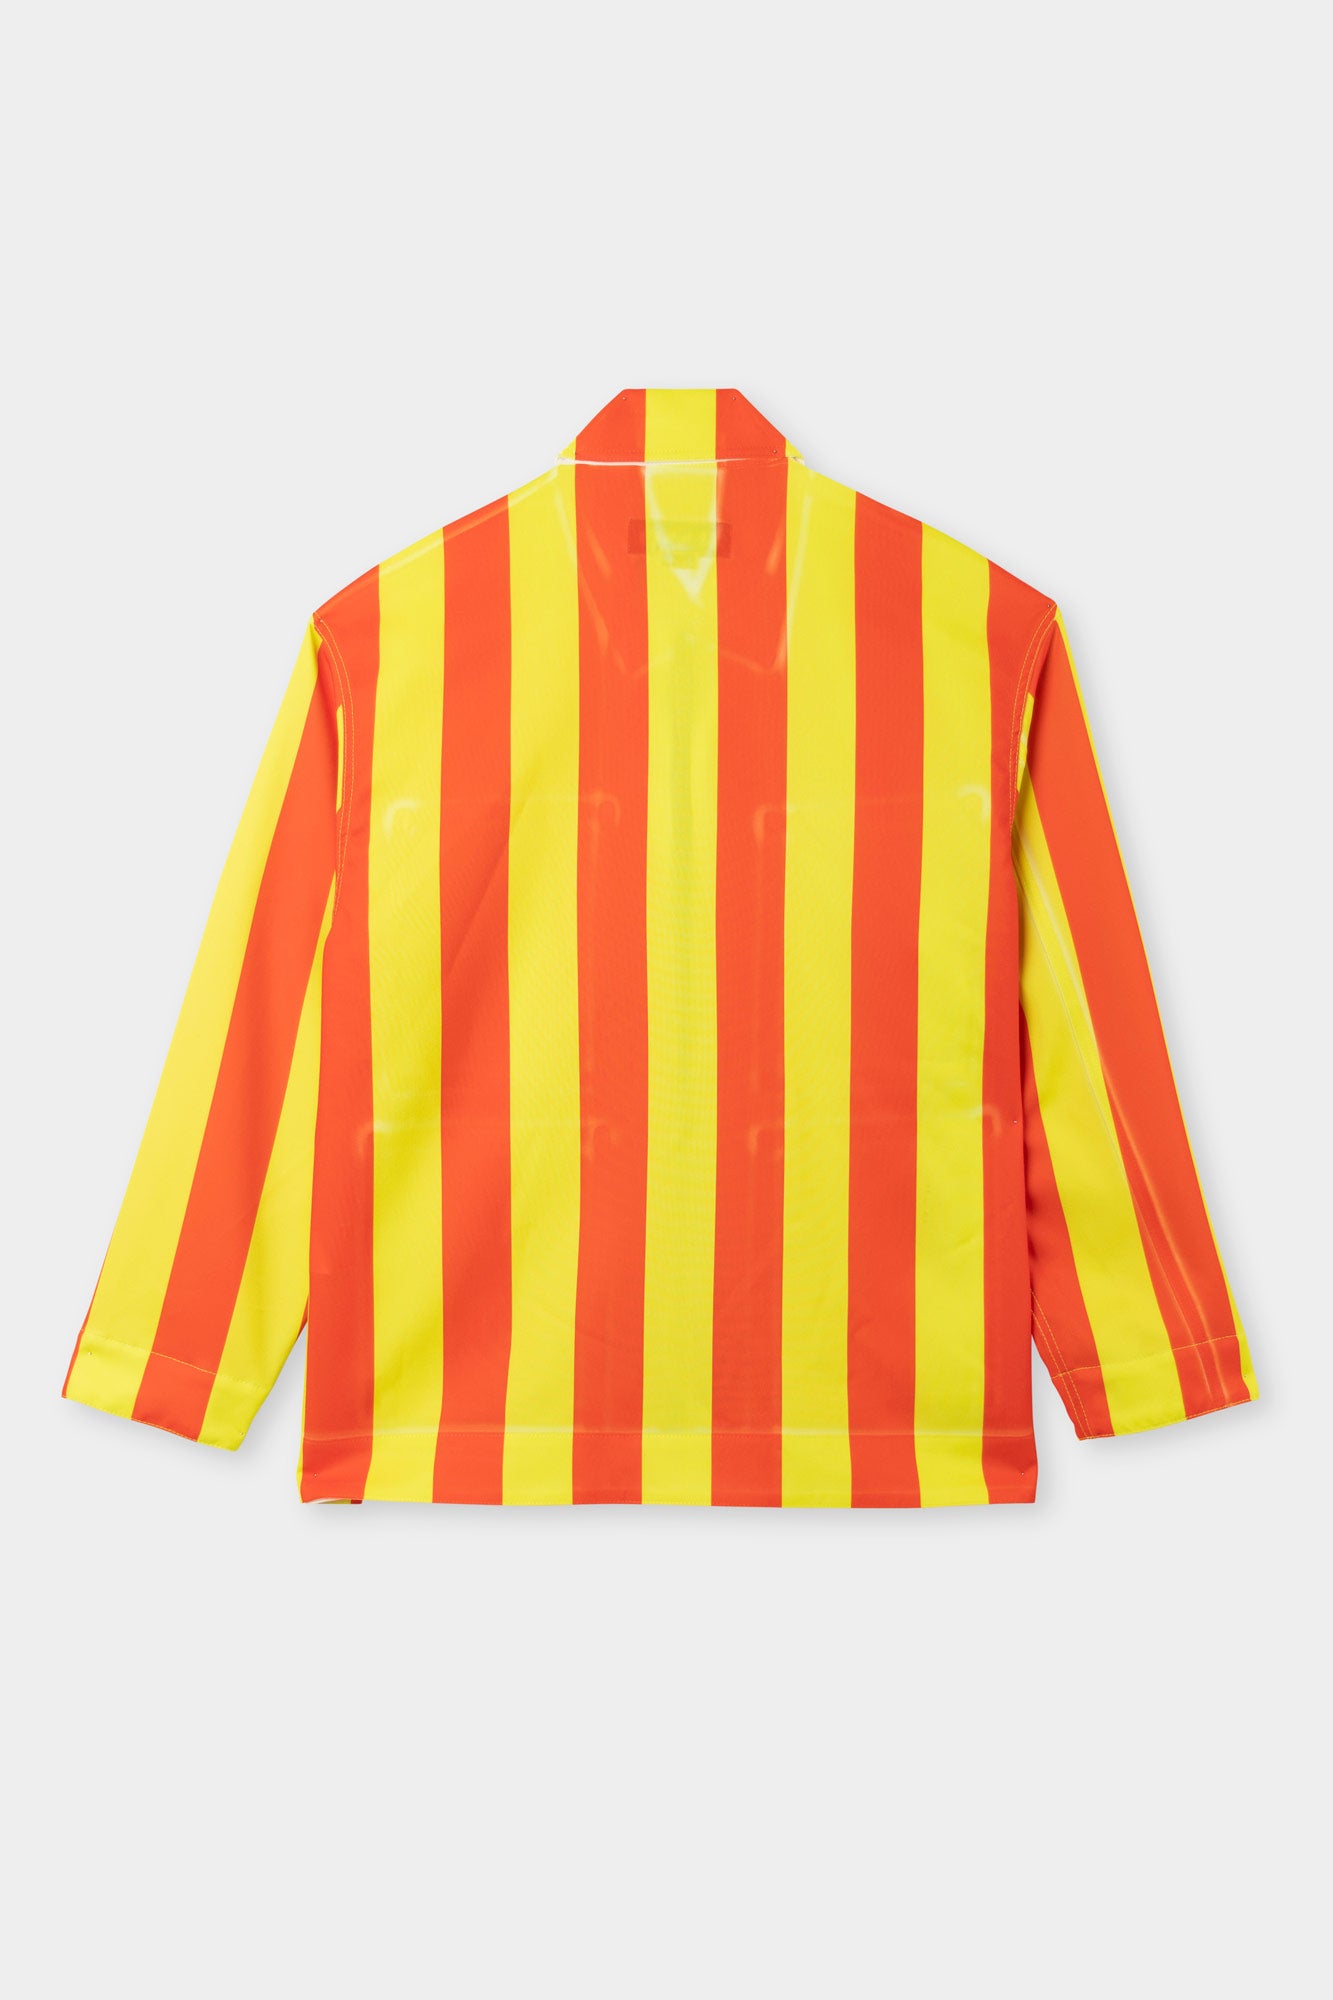 CARGO SHIRT / red & yellow stripes